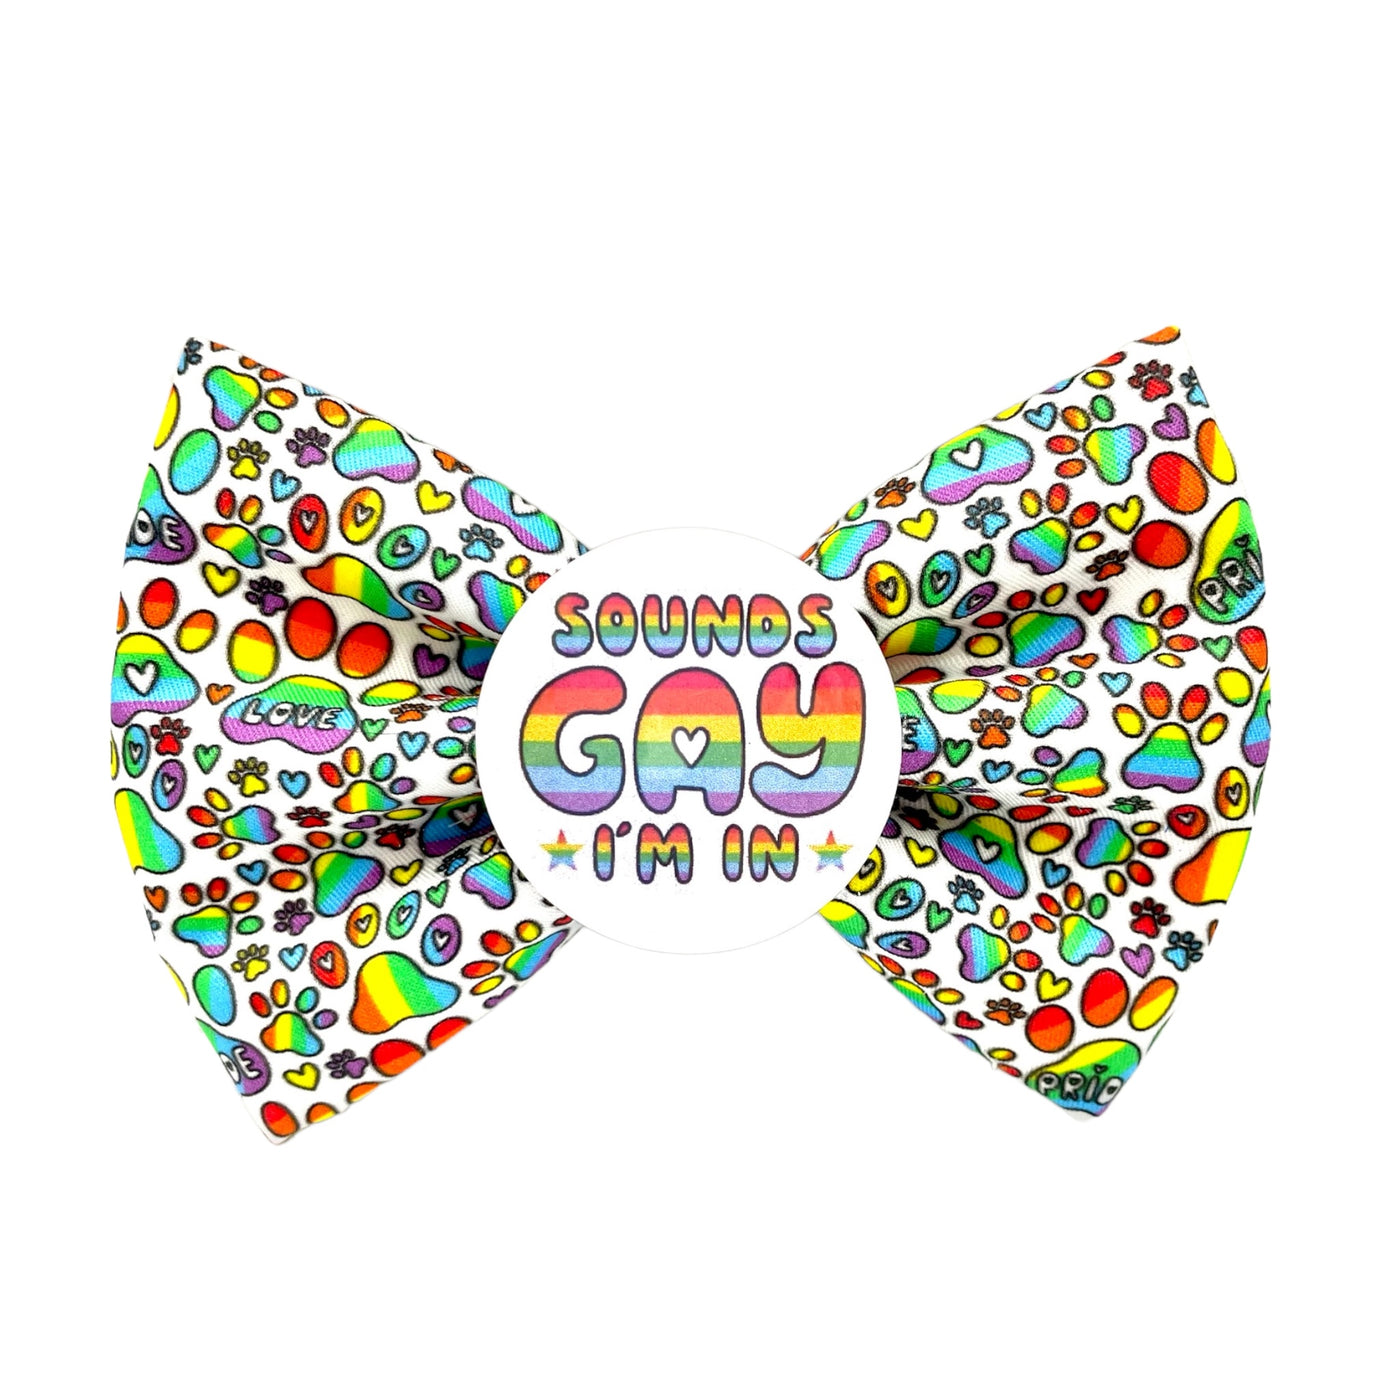 Pride Paws Badge Bow®